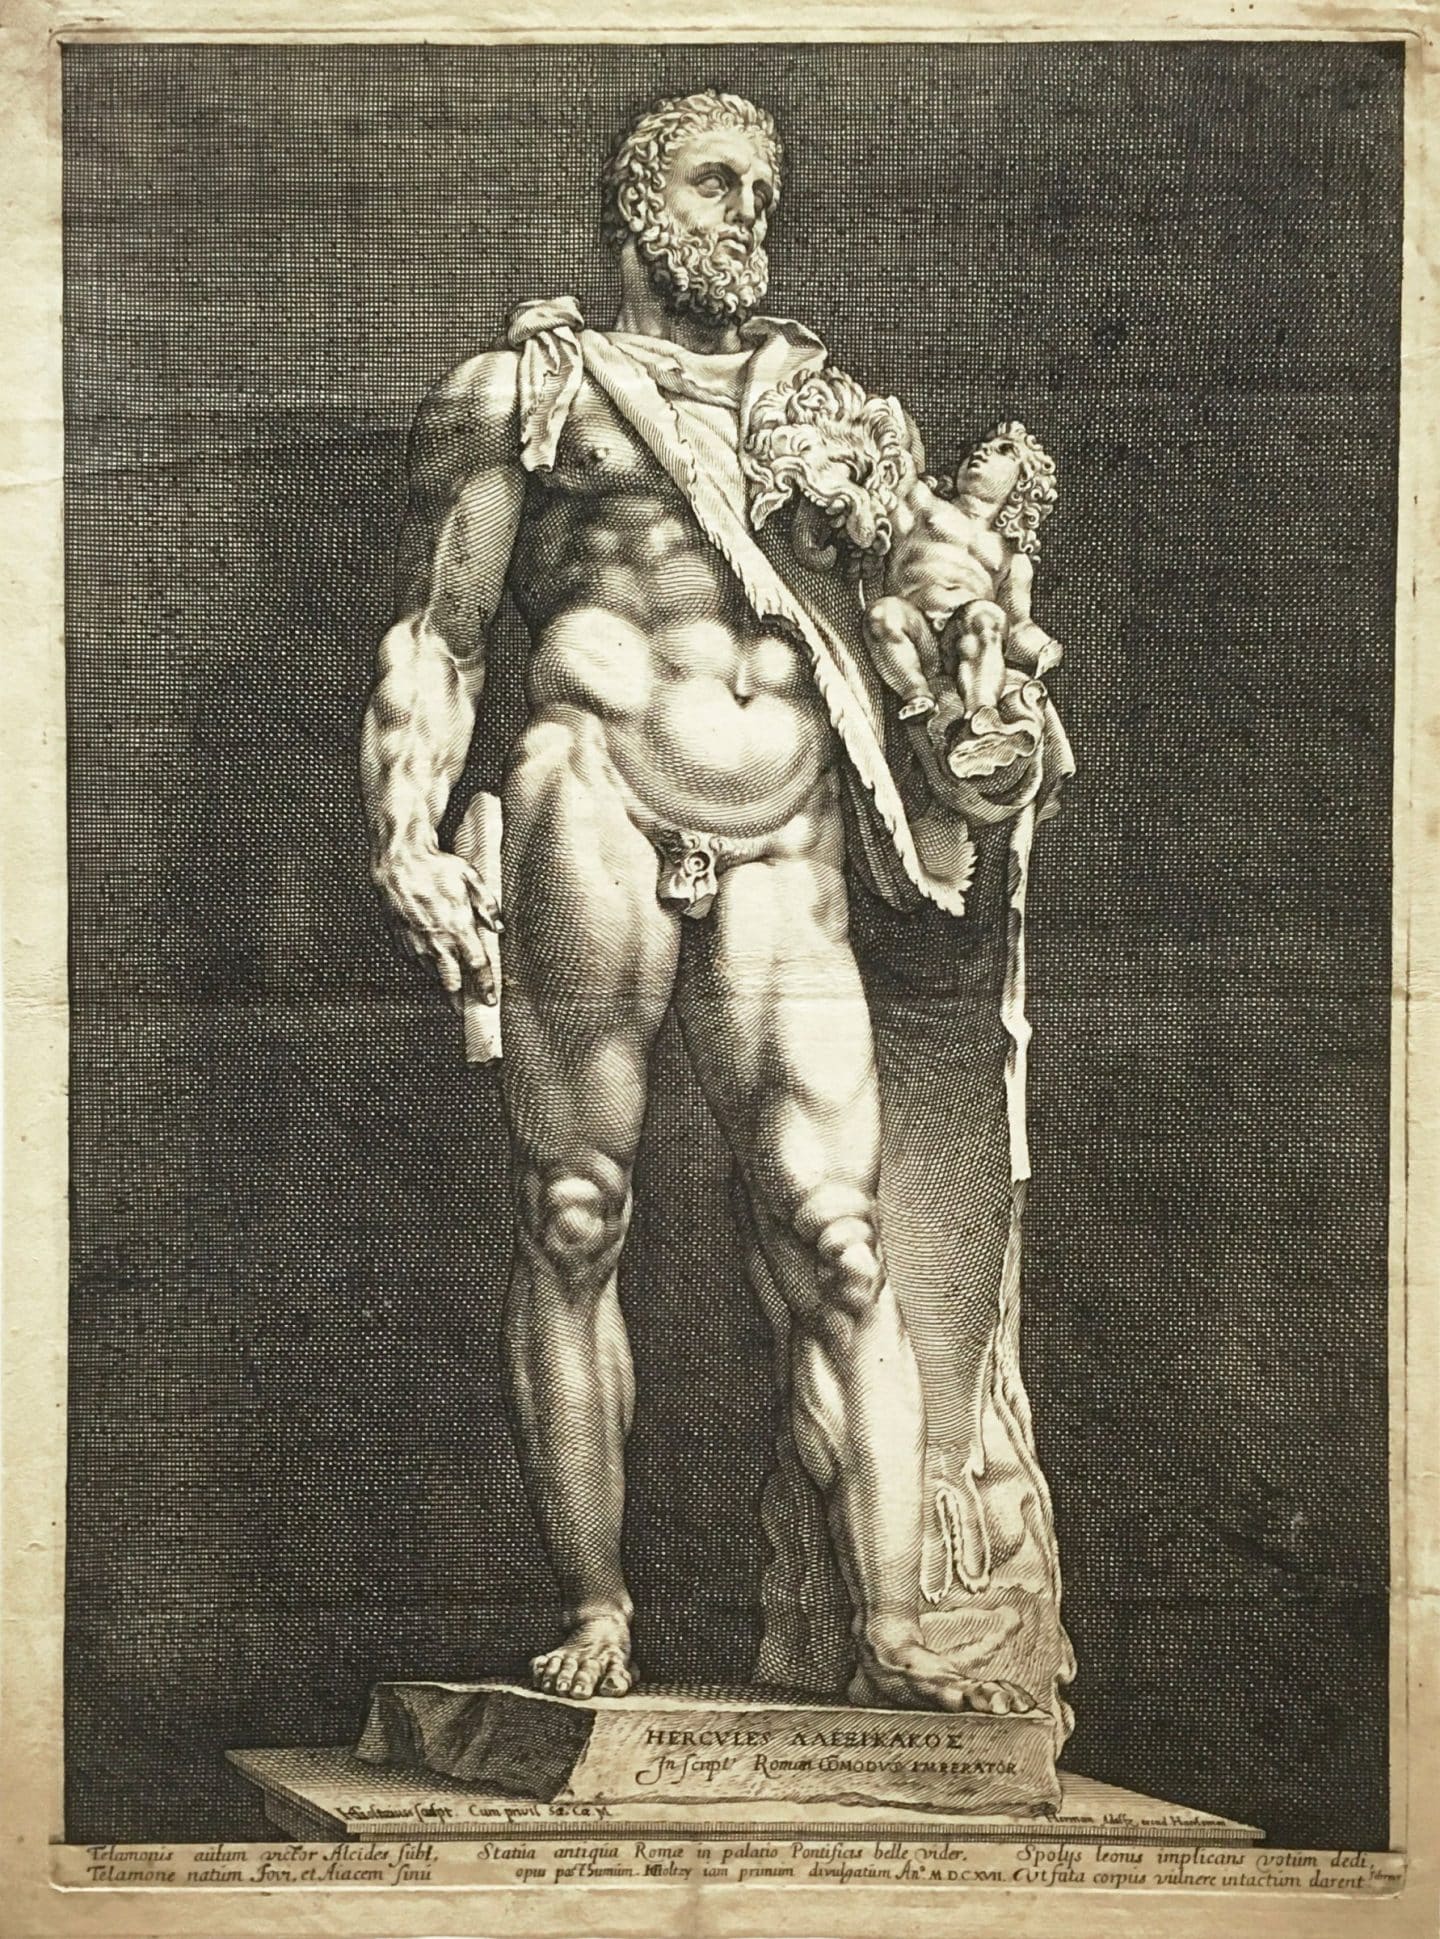 Hendrik Goltzius, The Emperor Commodus as Hercules, from Three Famous Antique Statues at Rome (also known as Hercules and Telephos), around 1592, engraving on paper. Gift of Jan Johnson, 2004 (47-010). Photo: Bernard Clark